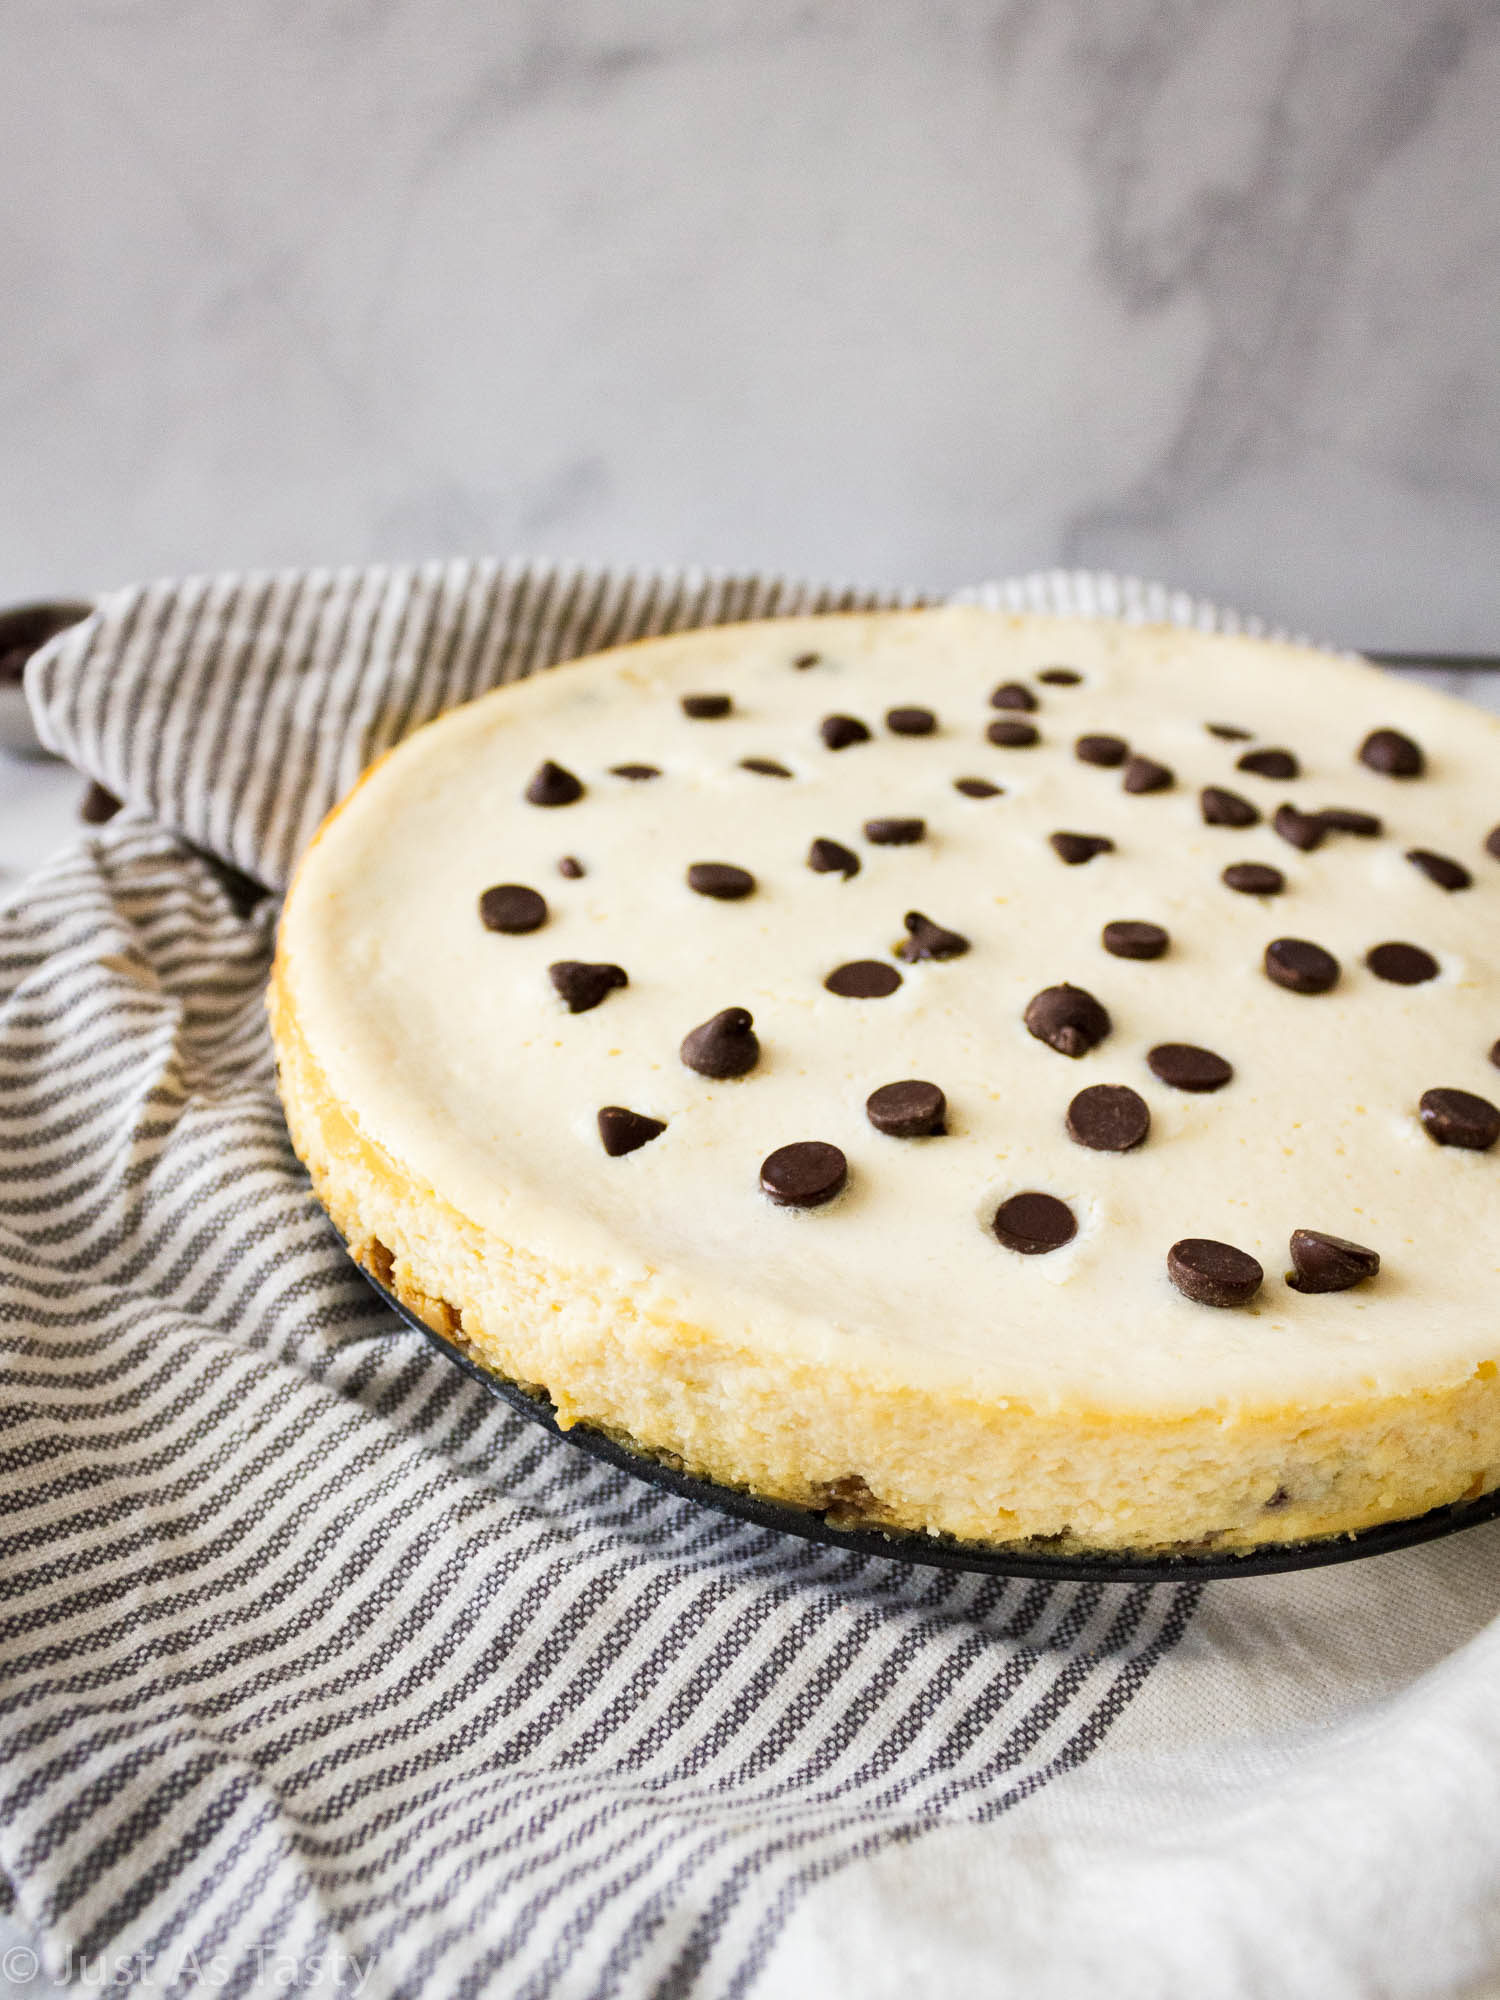 Cheesecake topped with chocolate chips.